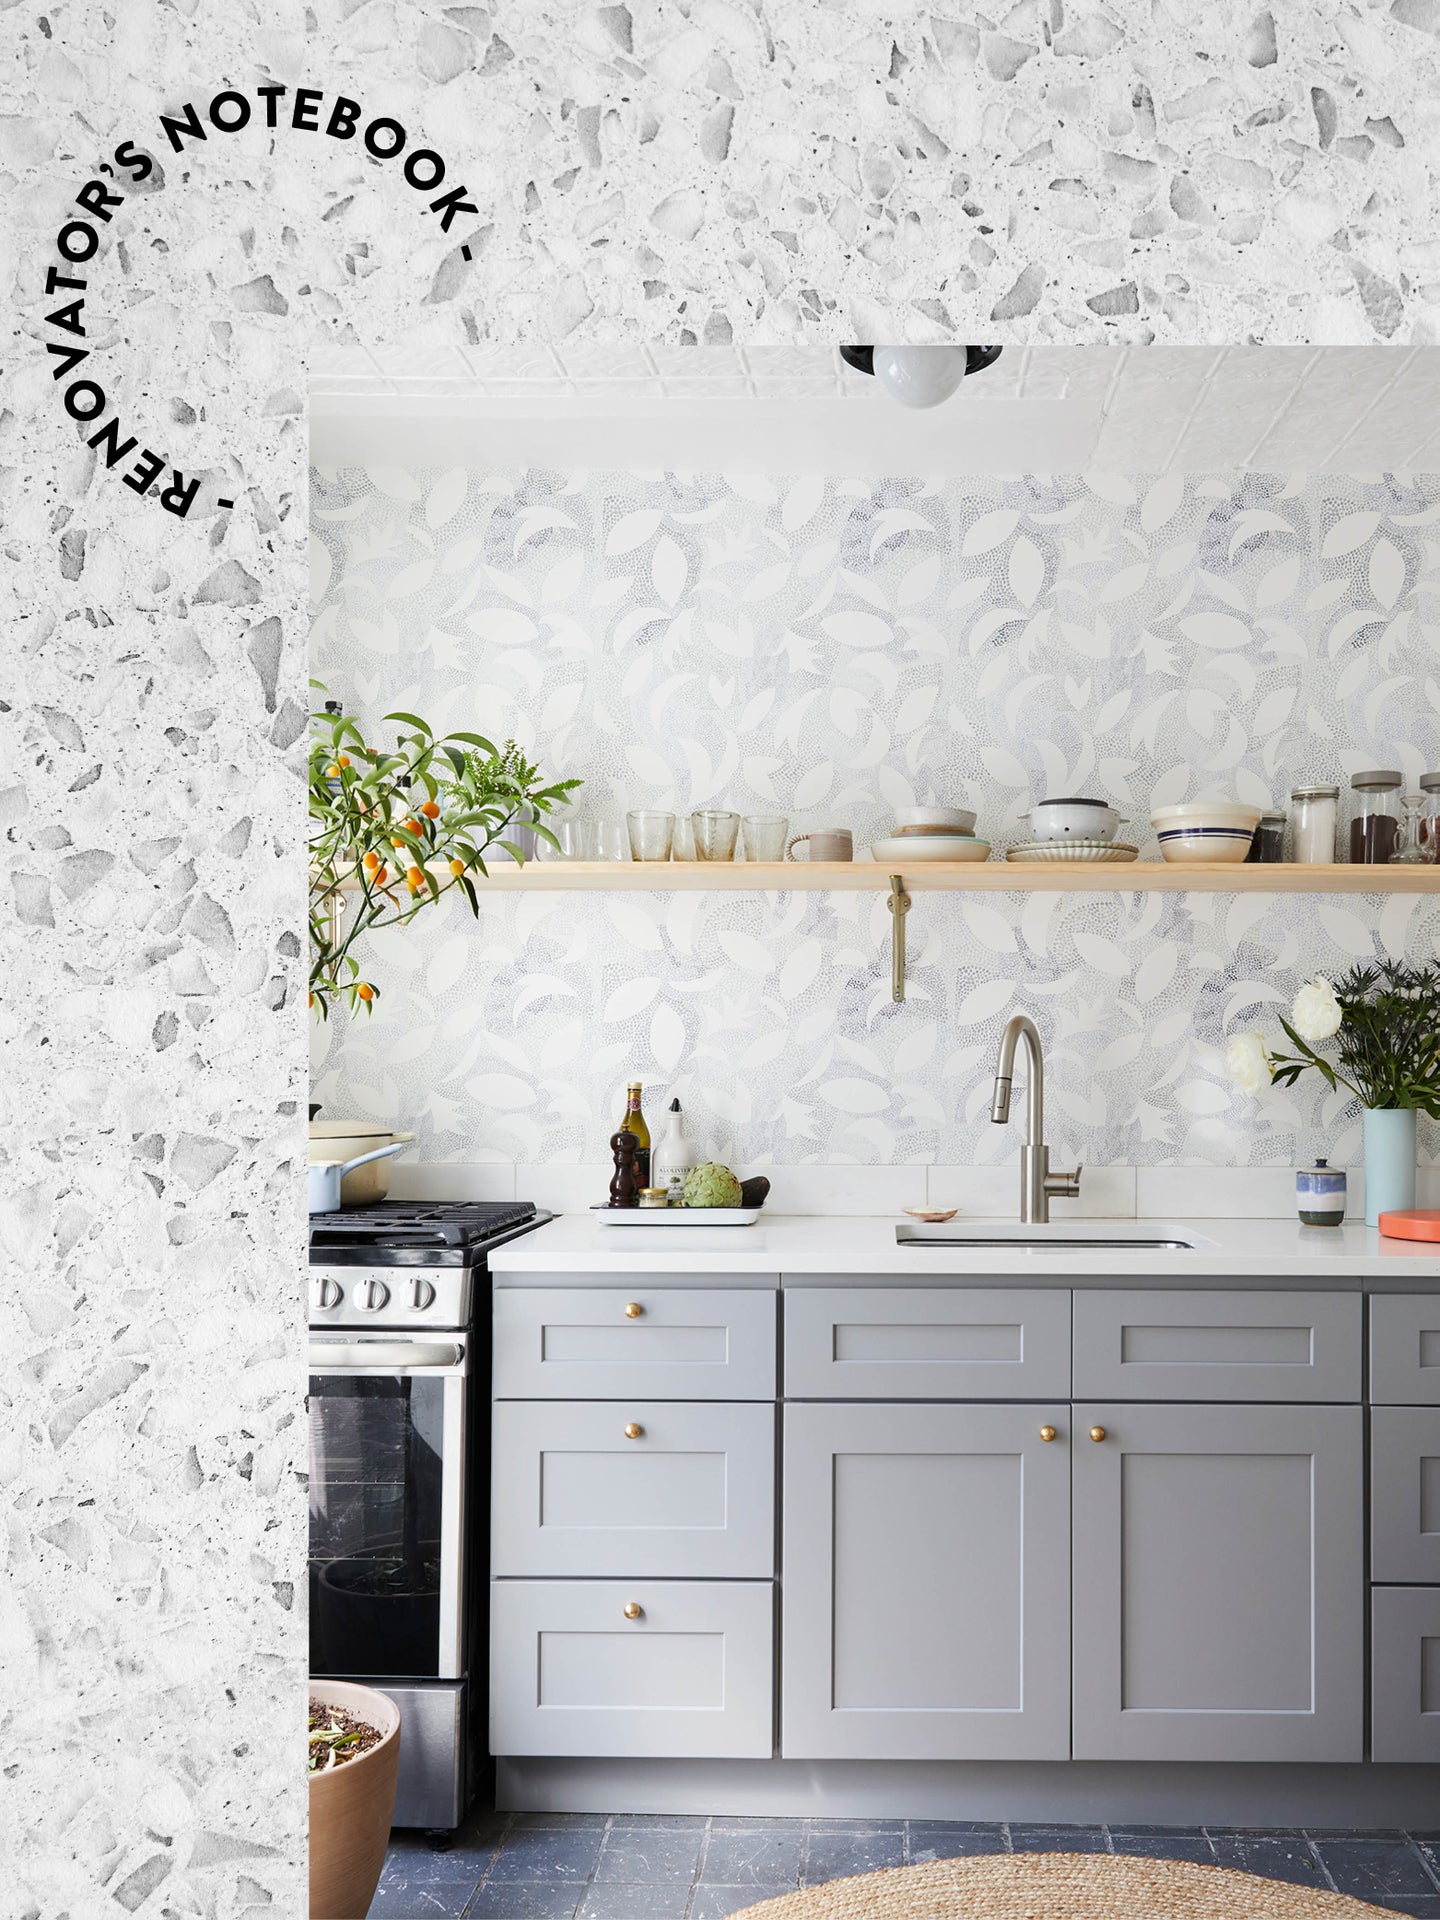 gray kitchen on a splattered backdgroudn with reno notebook stamp